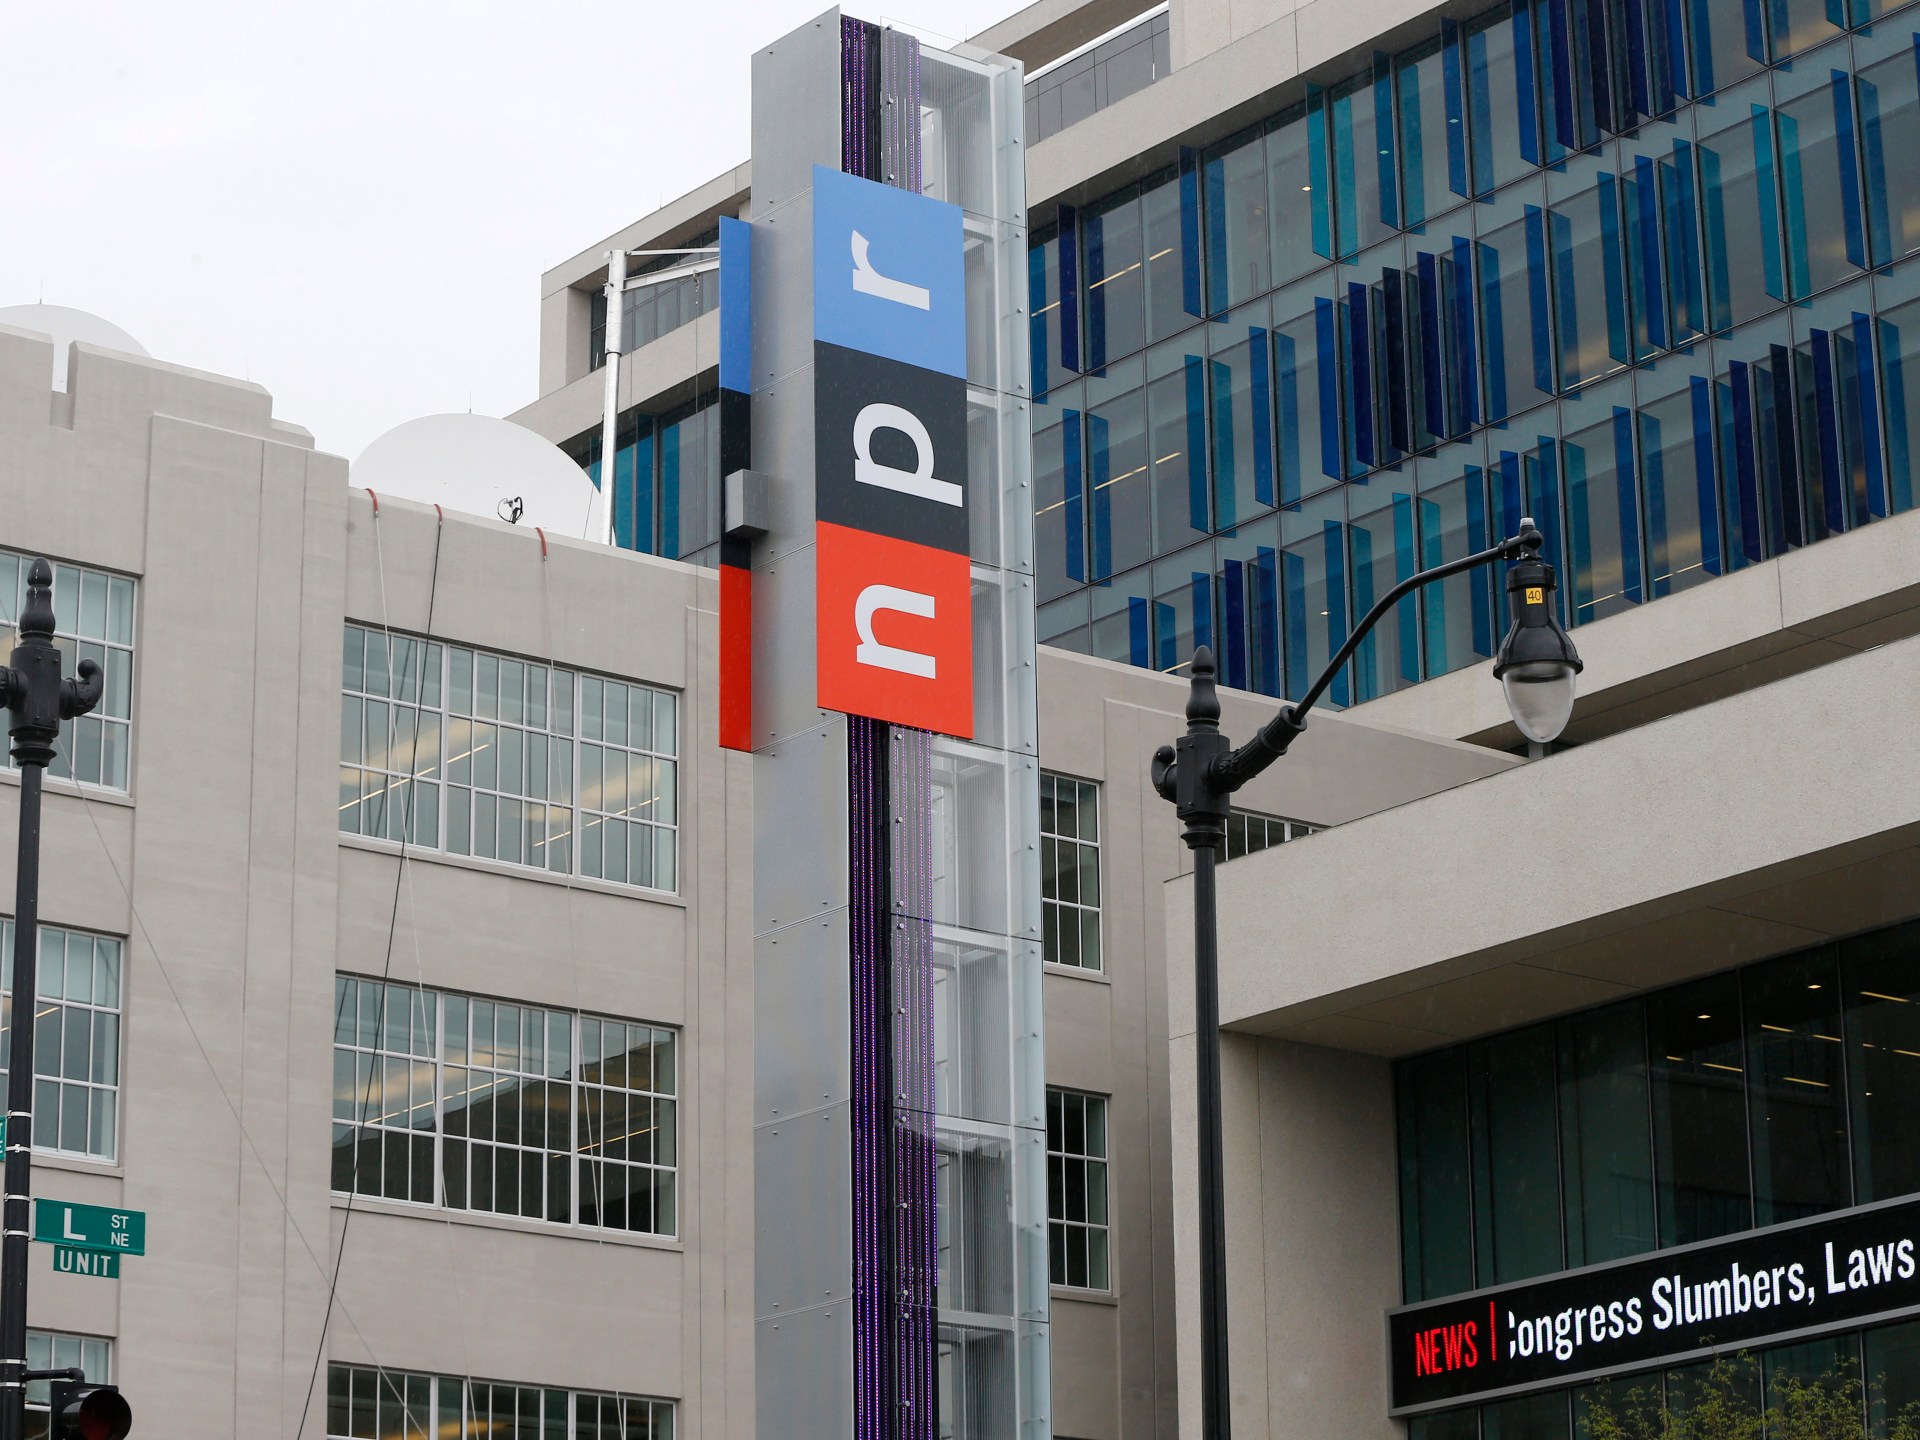 NPR editor resigns after accusing US outlet of liberal bias | Media News